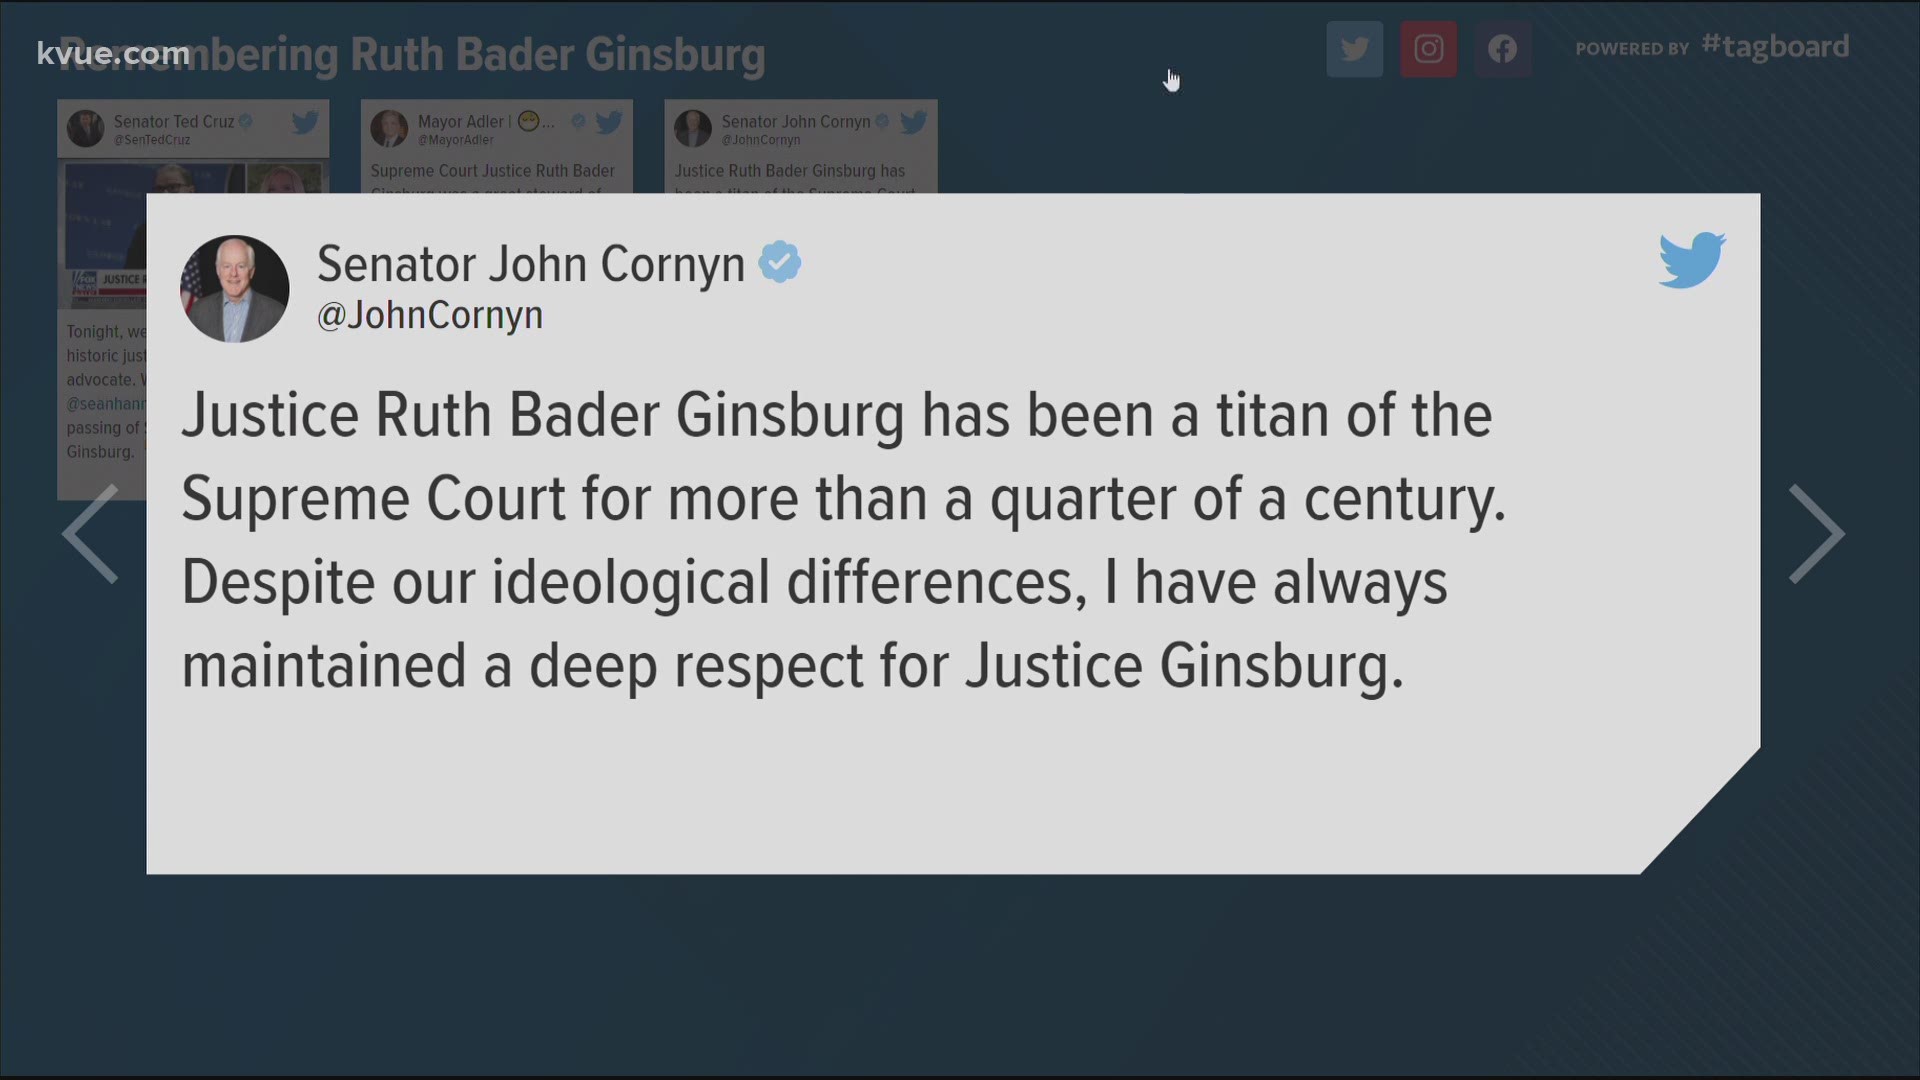 Texas representatives are sharing their thoughts on Ruth Bader Ginsburg's passing.